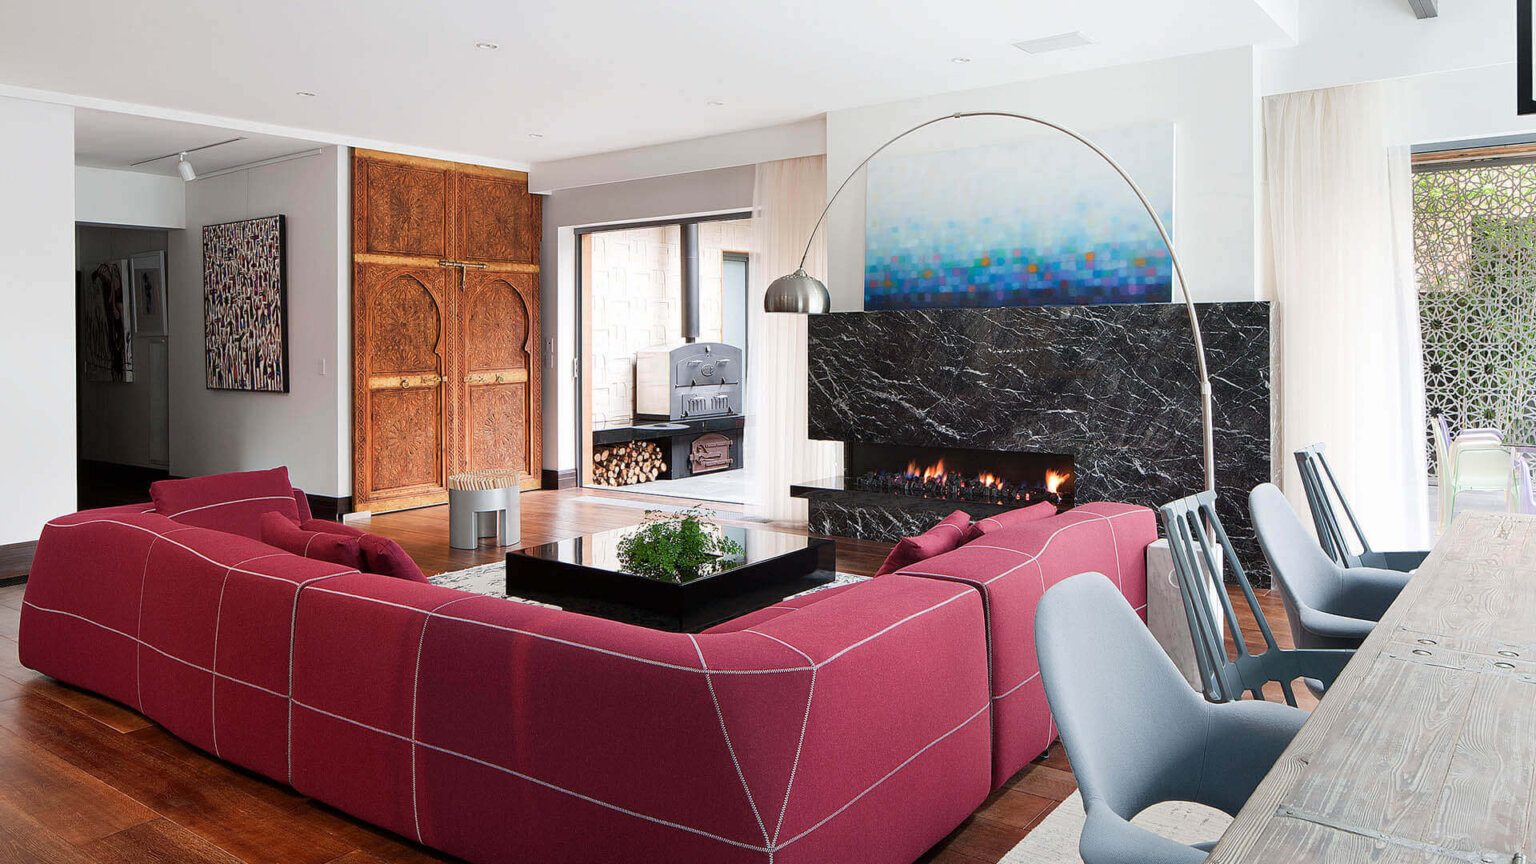 Malvern extensions and renovation - lounge area with marble fireplace